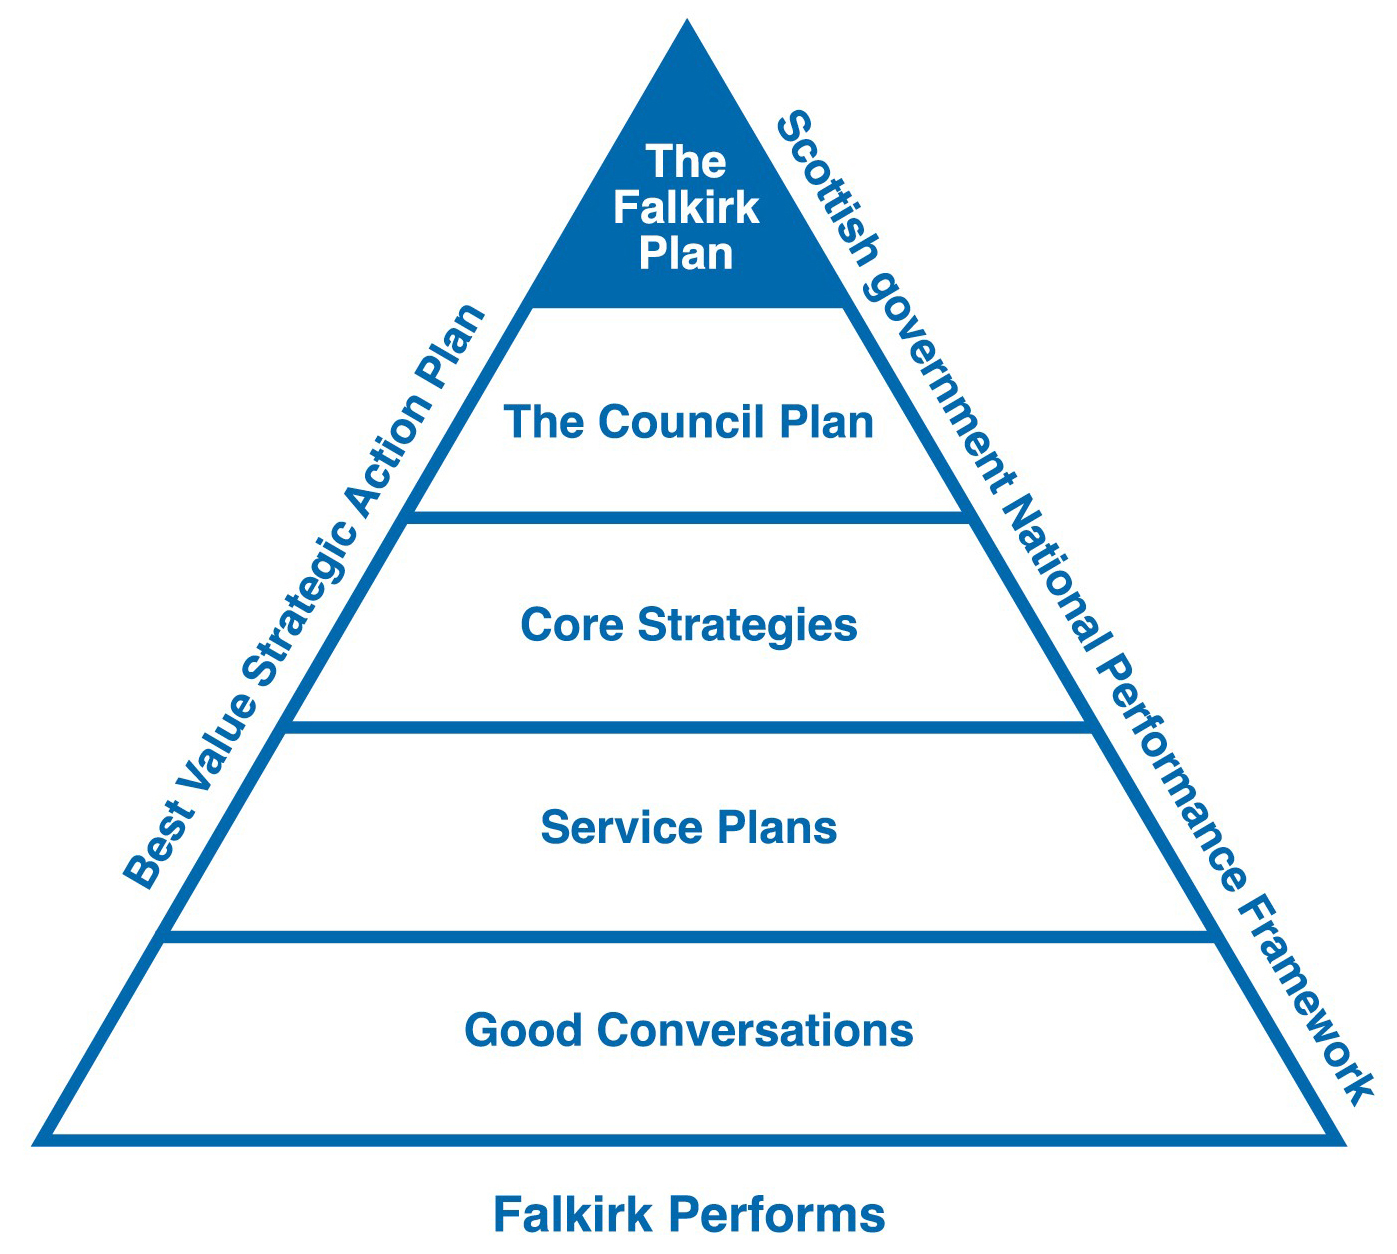 Pyramid showing The Falkirk Plan at the top with The Council Plan next, then Core Strategies, then Service Plans, then Good Conversations and finally Falkirk Performs at the bottom